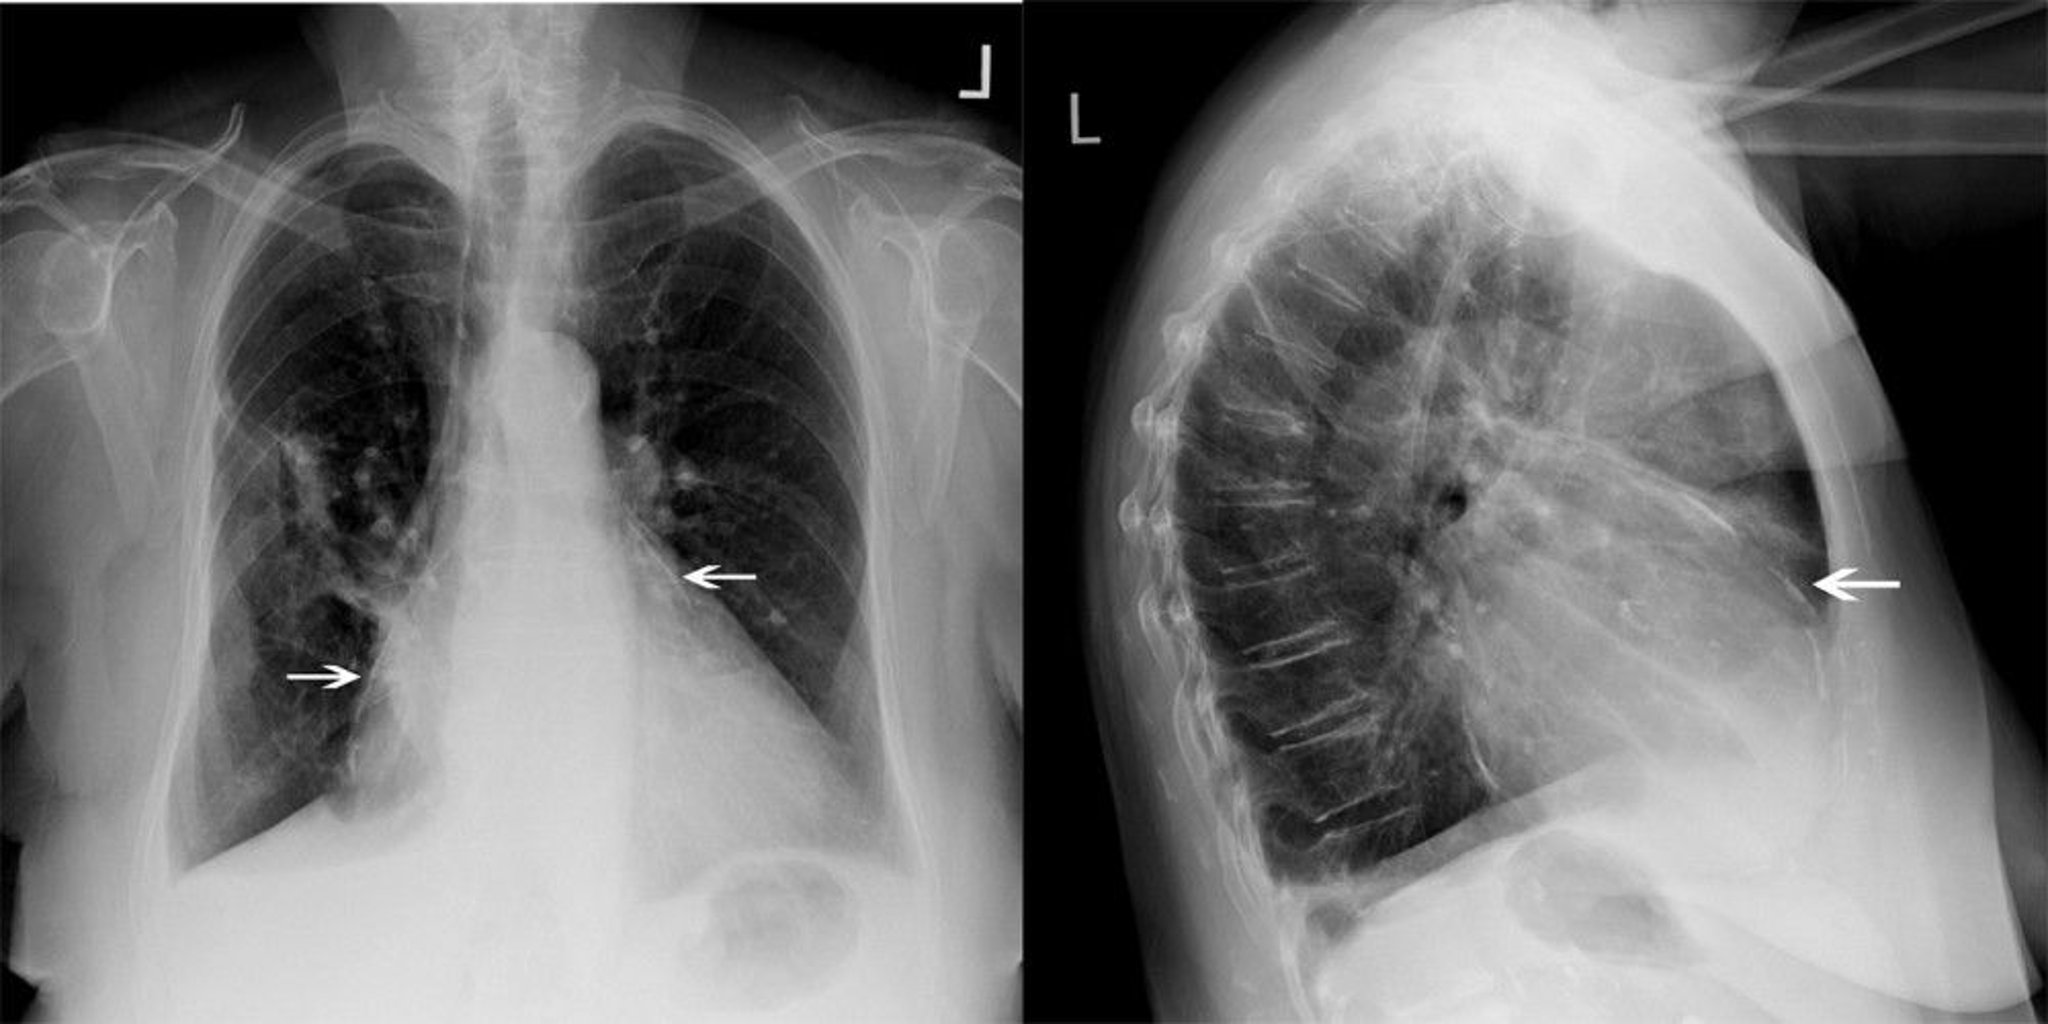 Chest X-Ray of a Patient with Constrictive Pericarditis